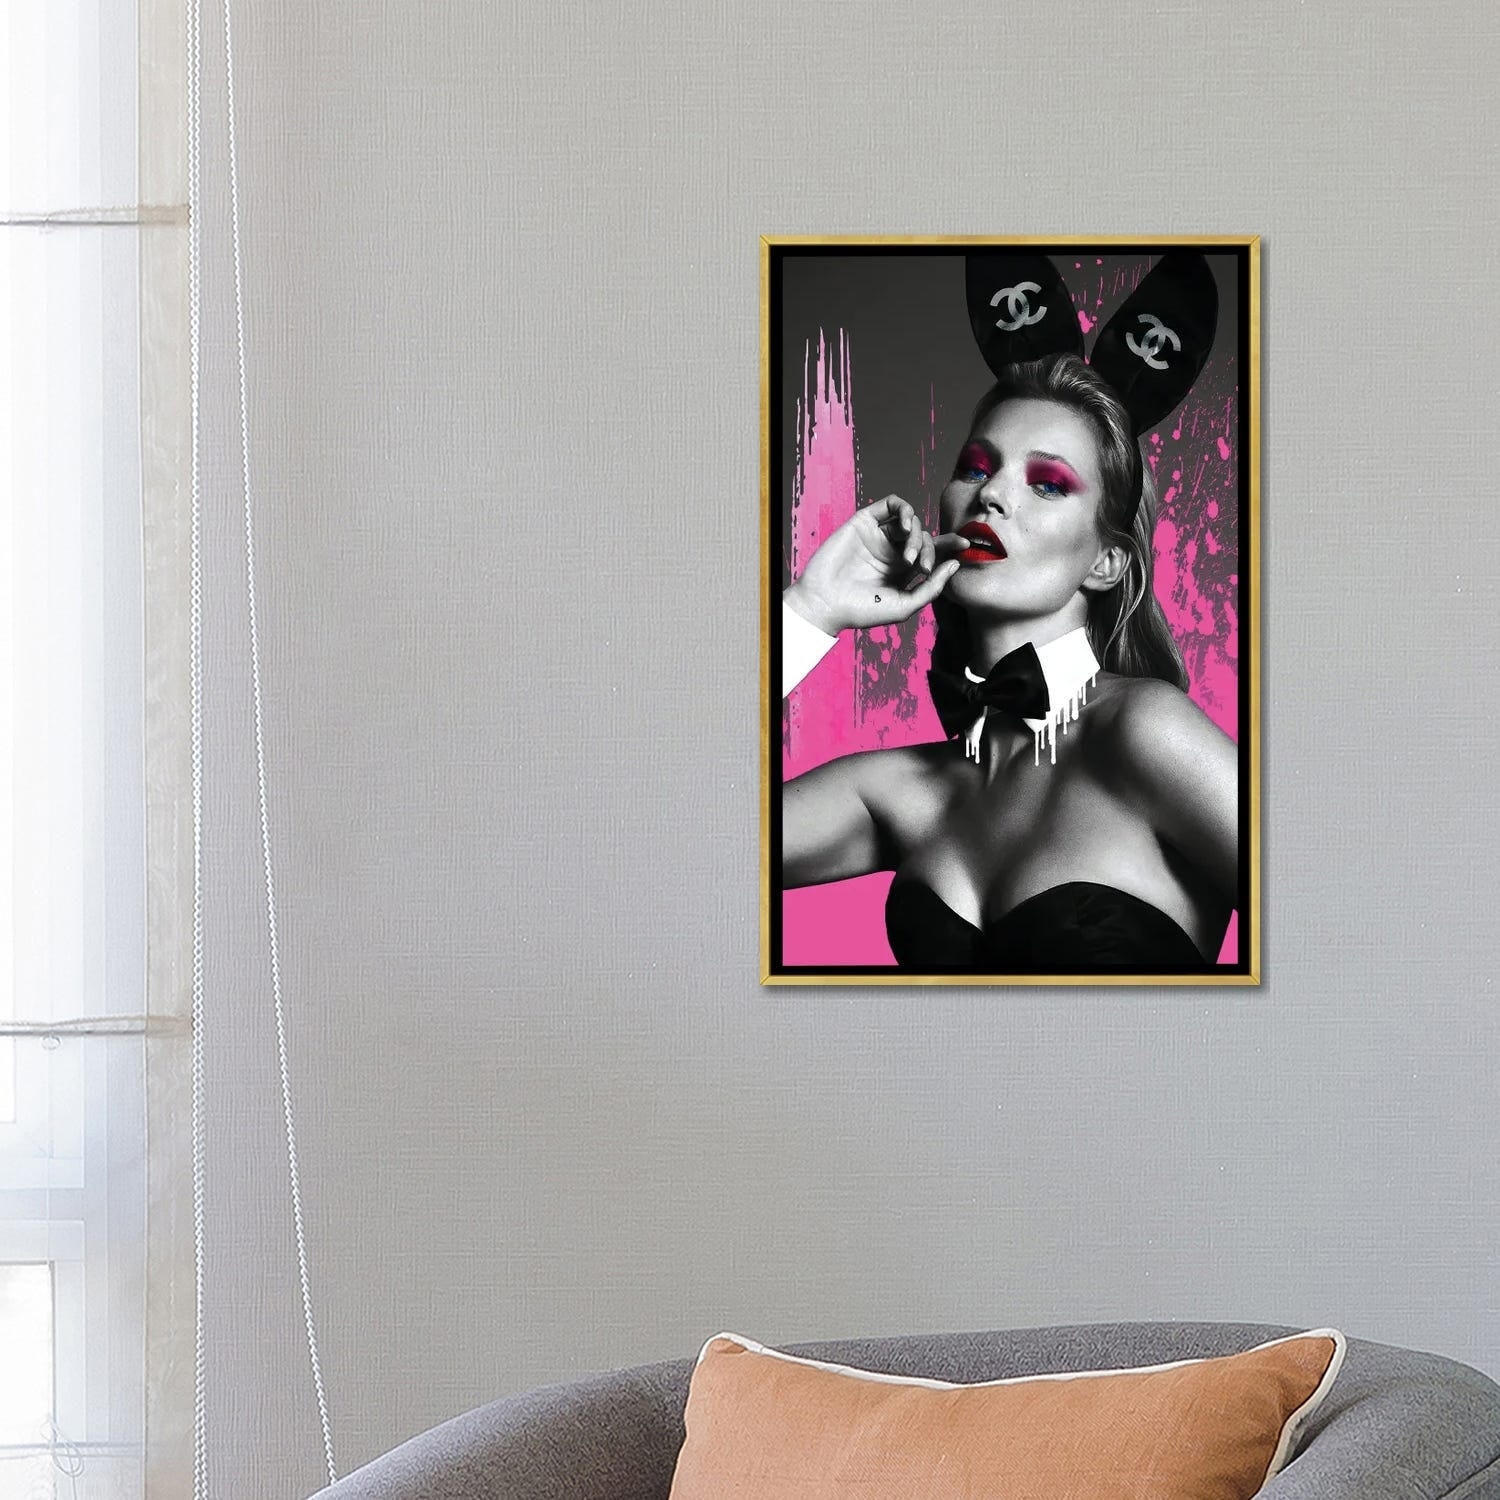 iCanvas Kate Moss Chanel by Frank Amoruso Framed - Bed Bath & Beyond -  37089969